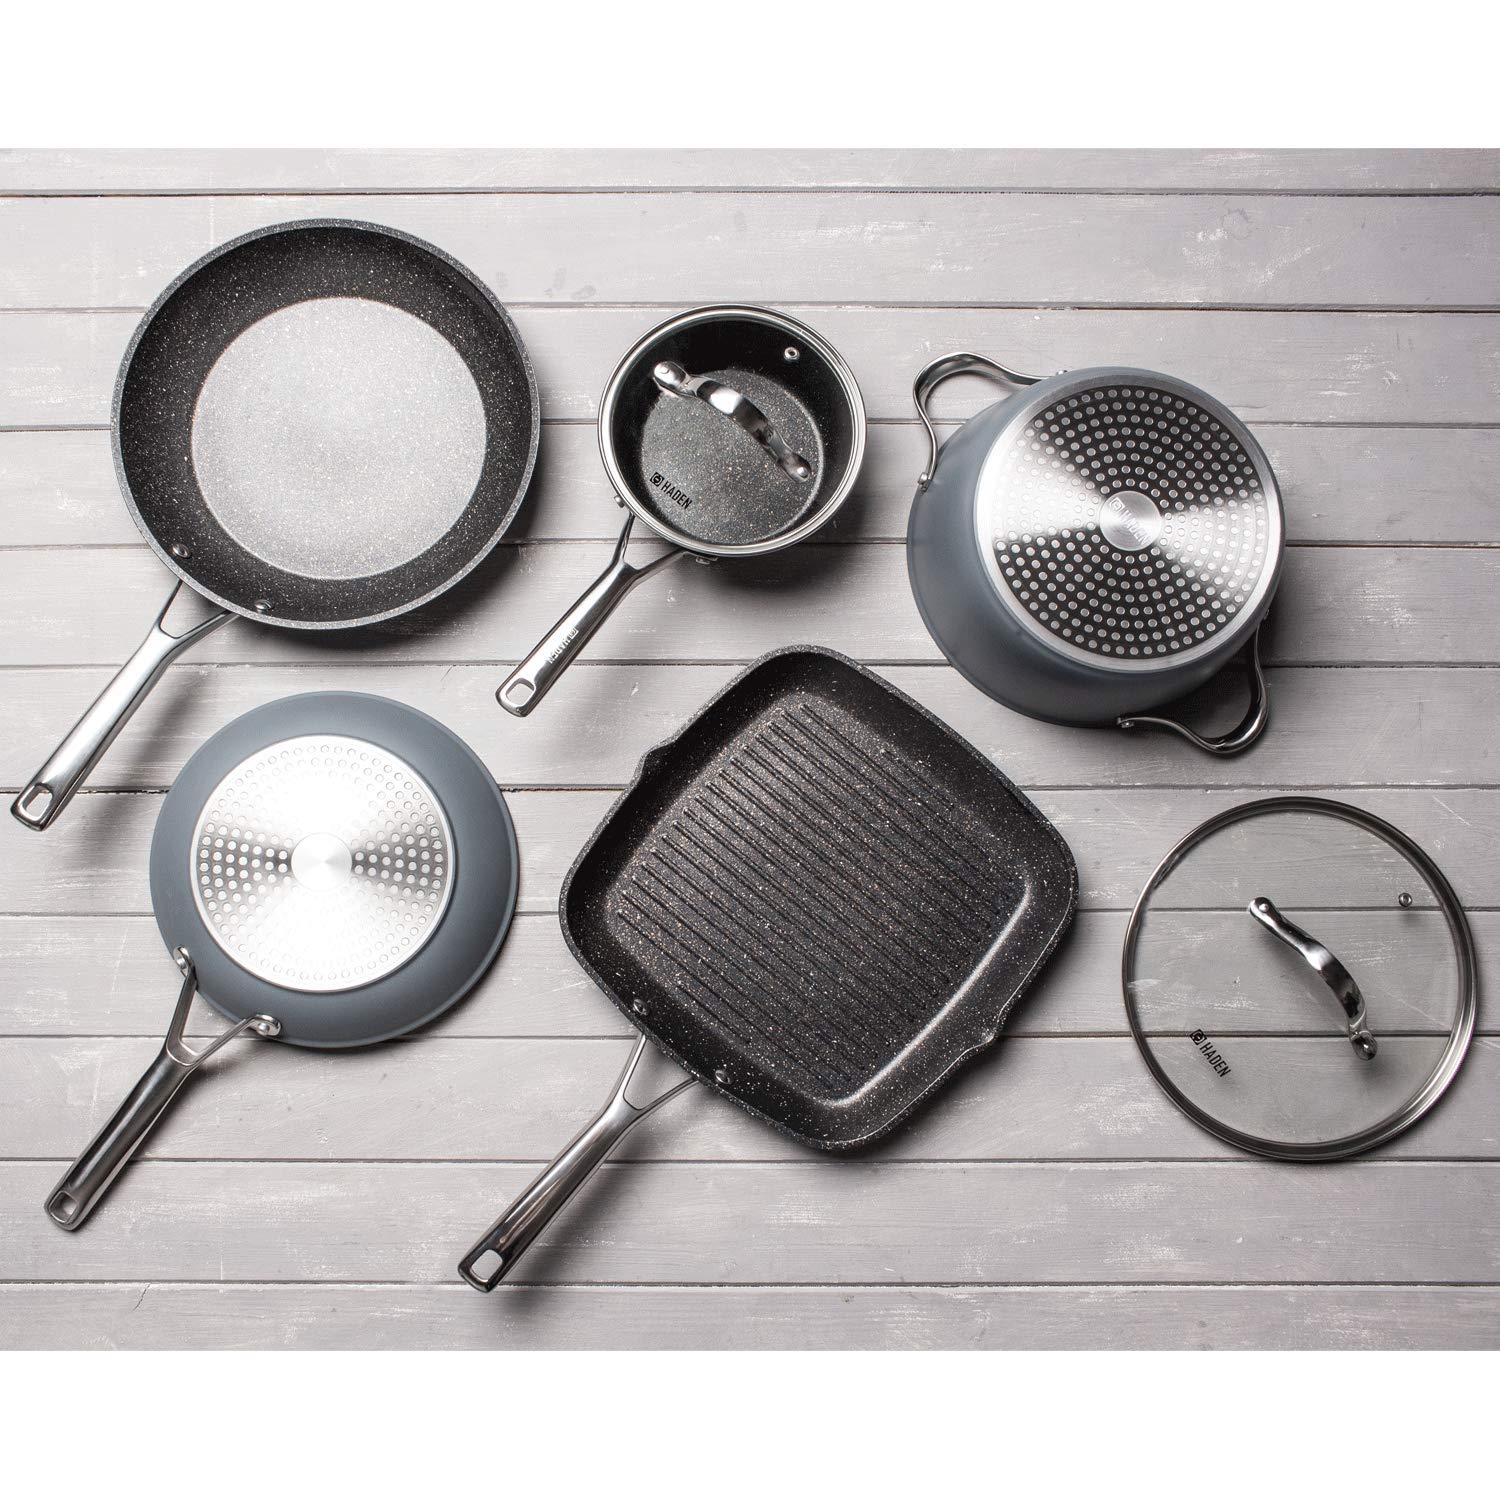 Haden Perth Saucepan (18cm)  with Solid and Comfortable Grip - pengessentials